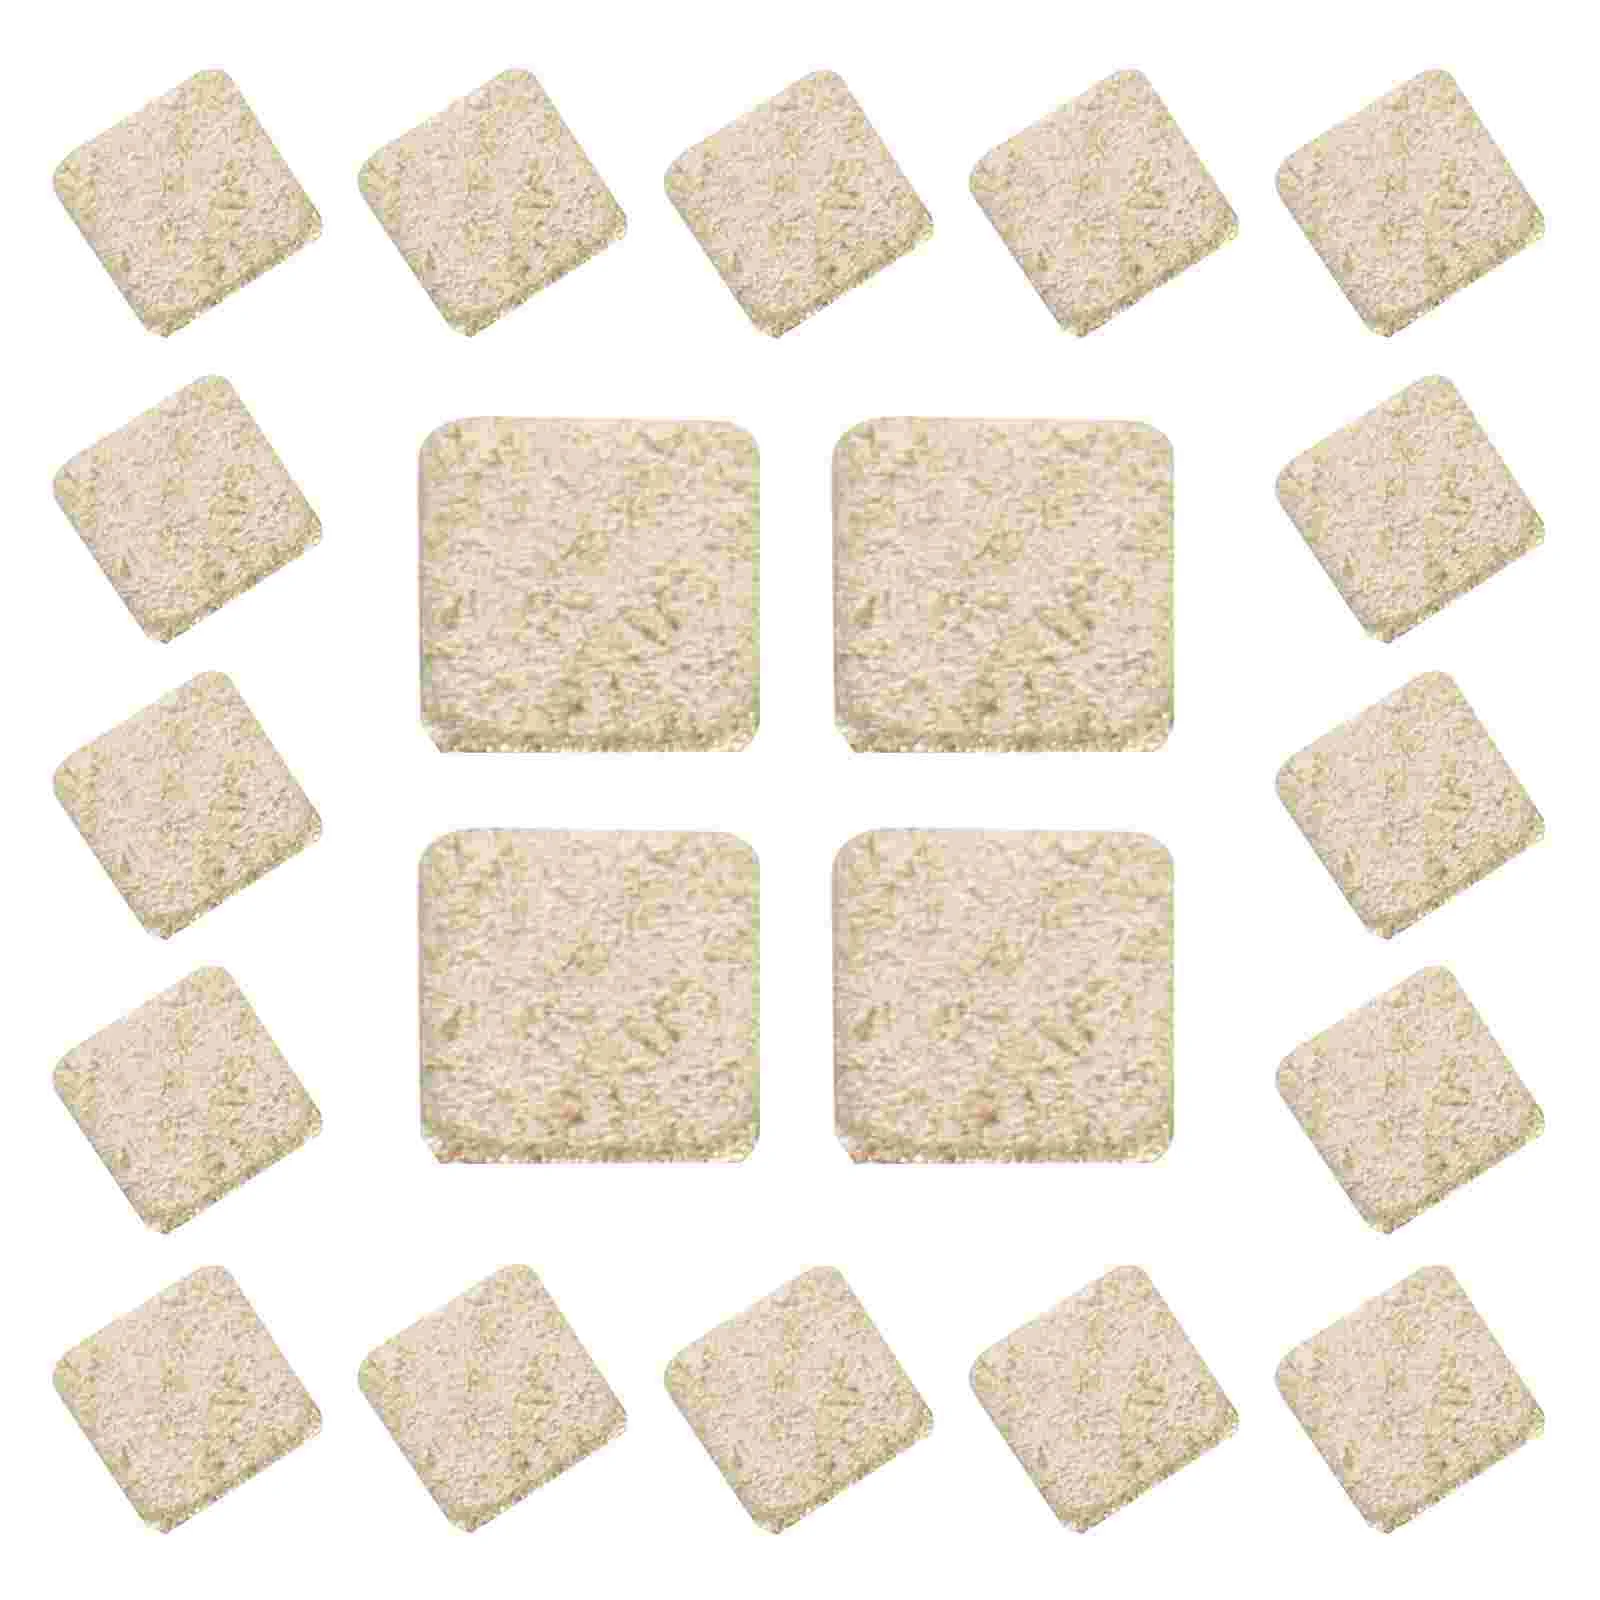 

100 Pcs Jewelry Welding Material Silver Jewlery Replacement Solder Tab Precut Soldering Kit Making Chip Easy